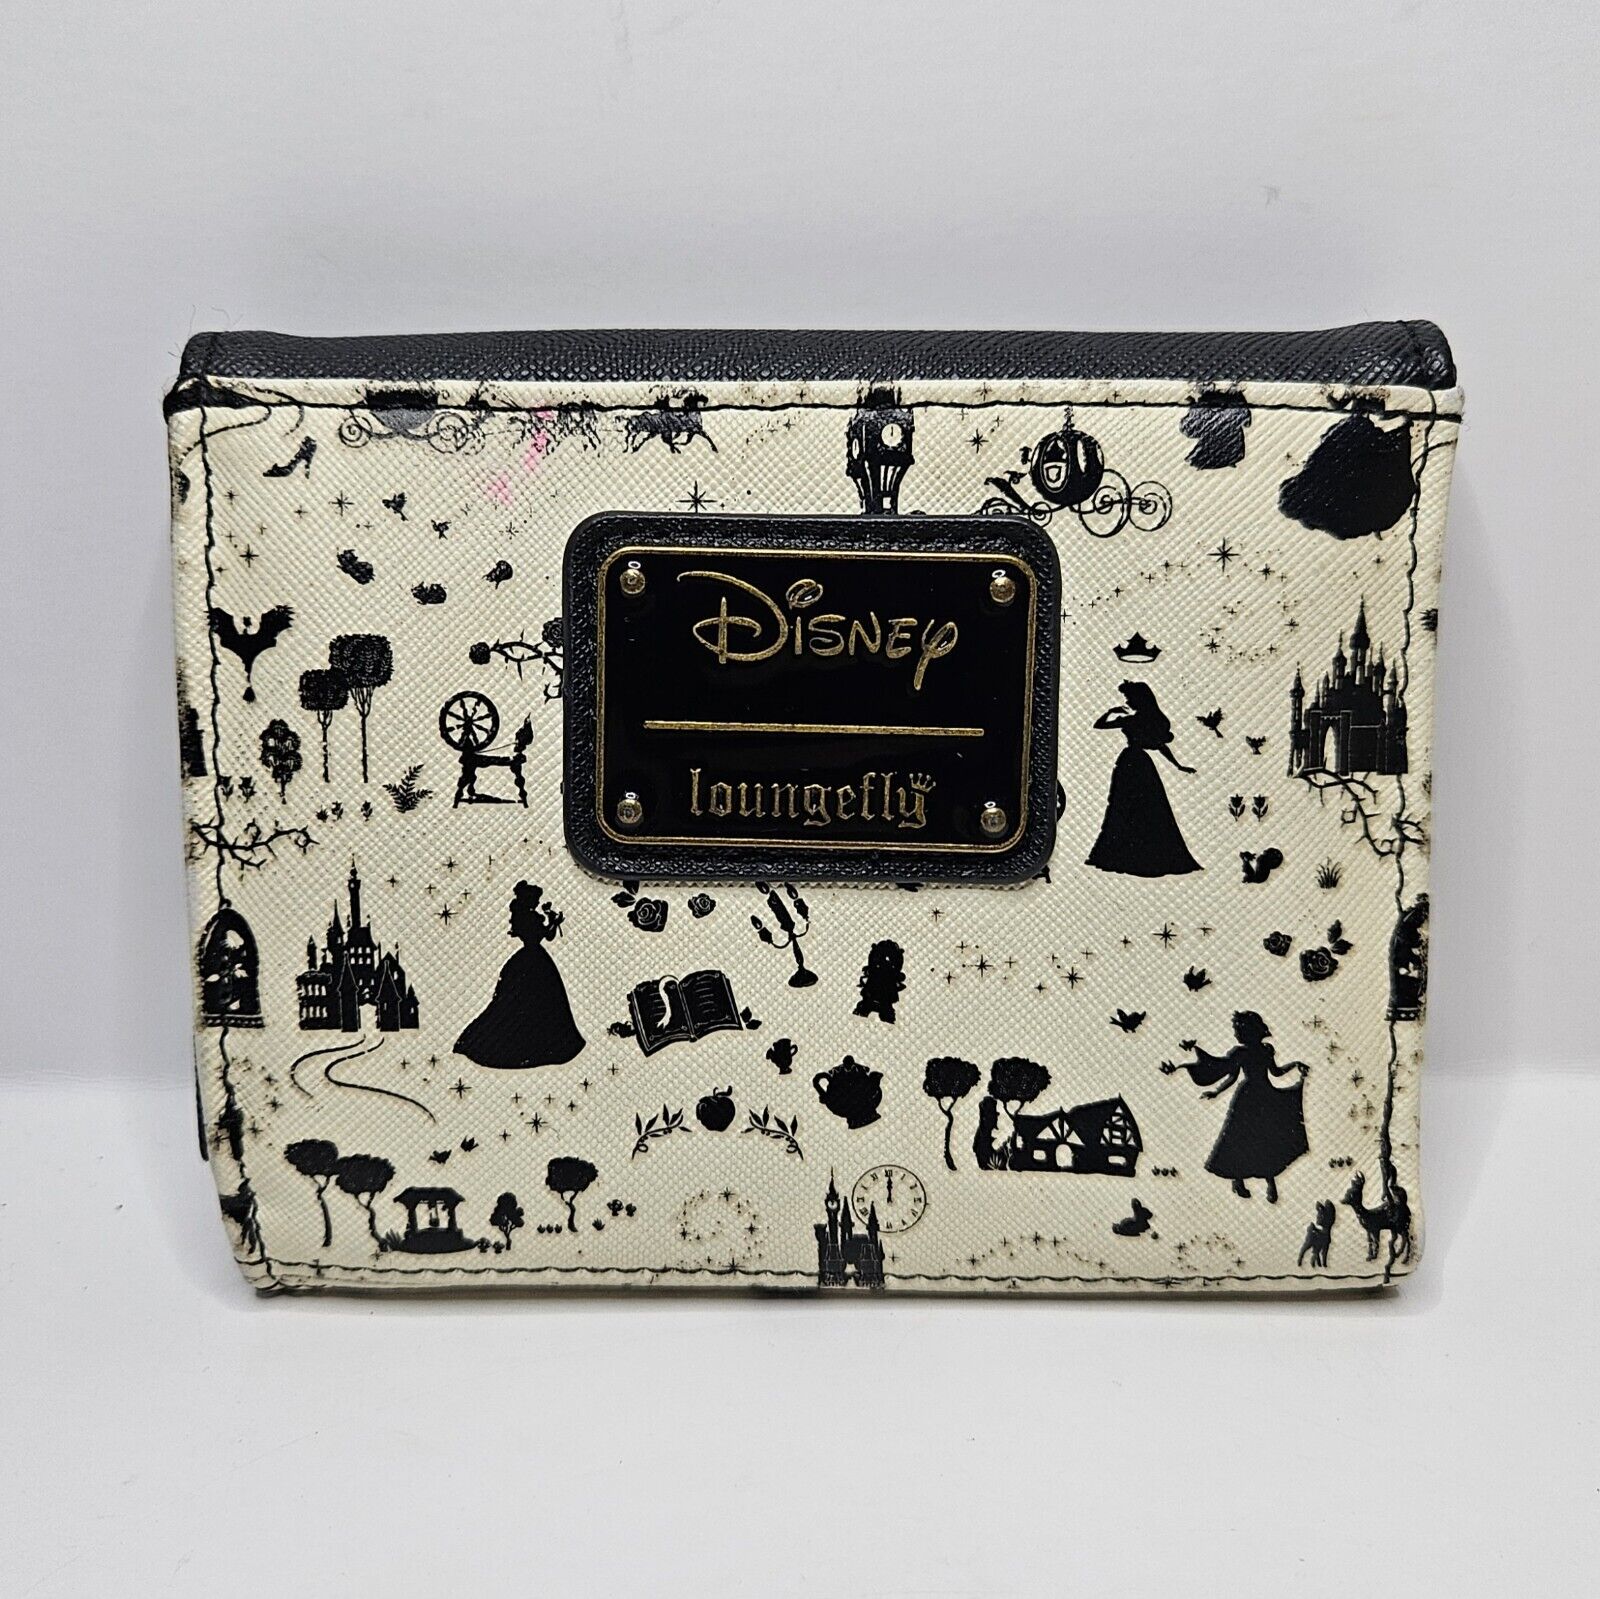 Loungefly x Disney Princess Vintage-Inspired Print Small Trifold Wallet